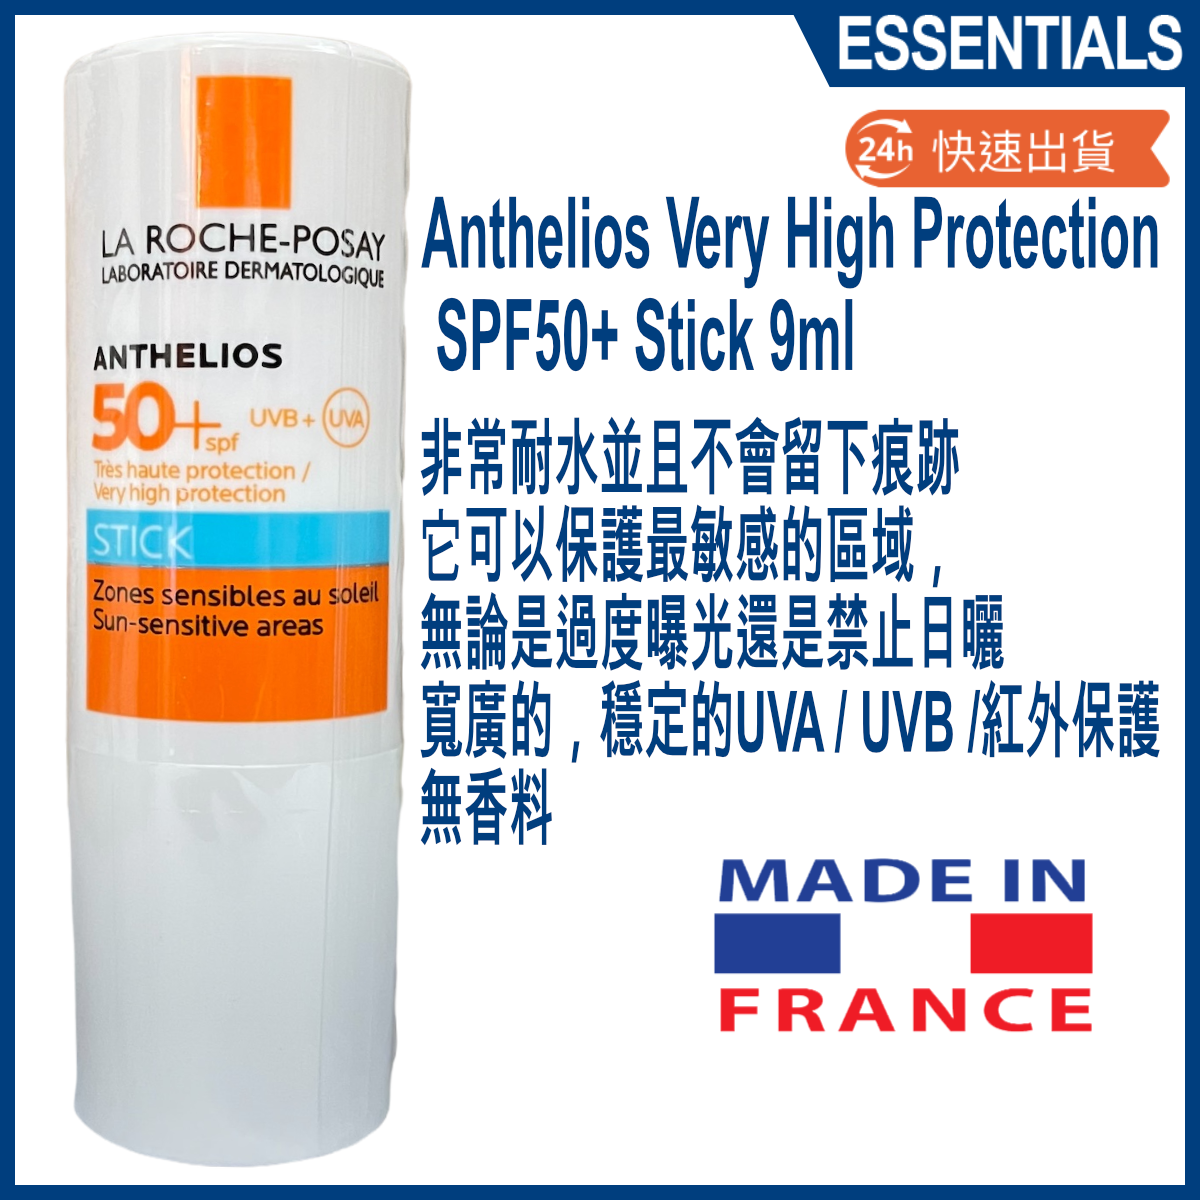 Anthelios Very High Protection  SPF50+ Stick 9 ml